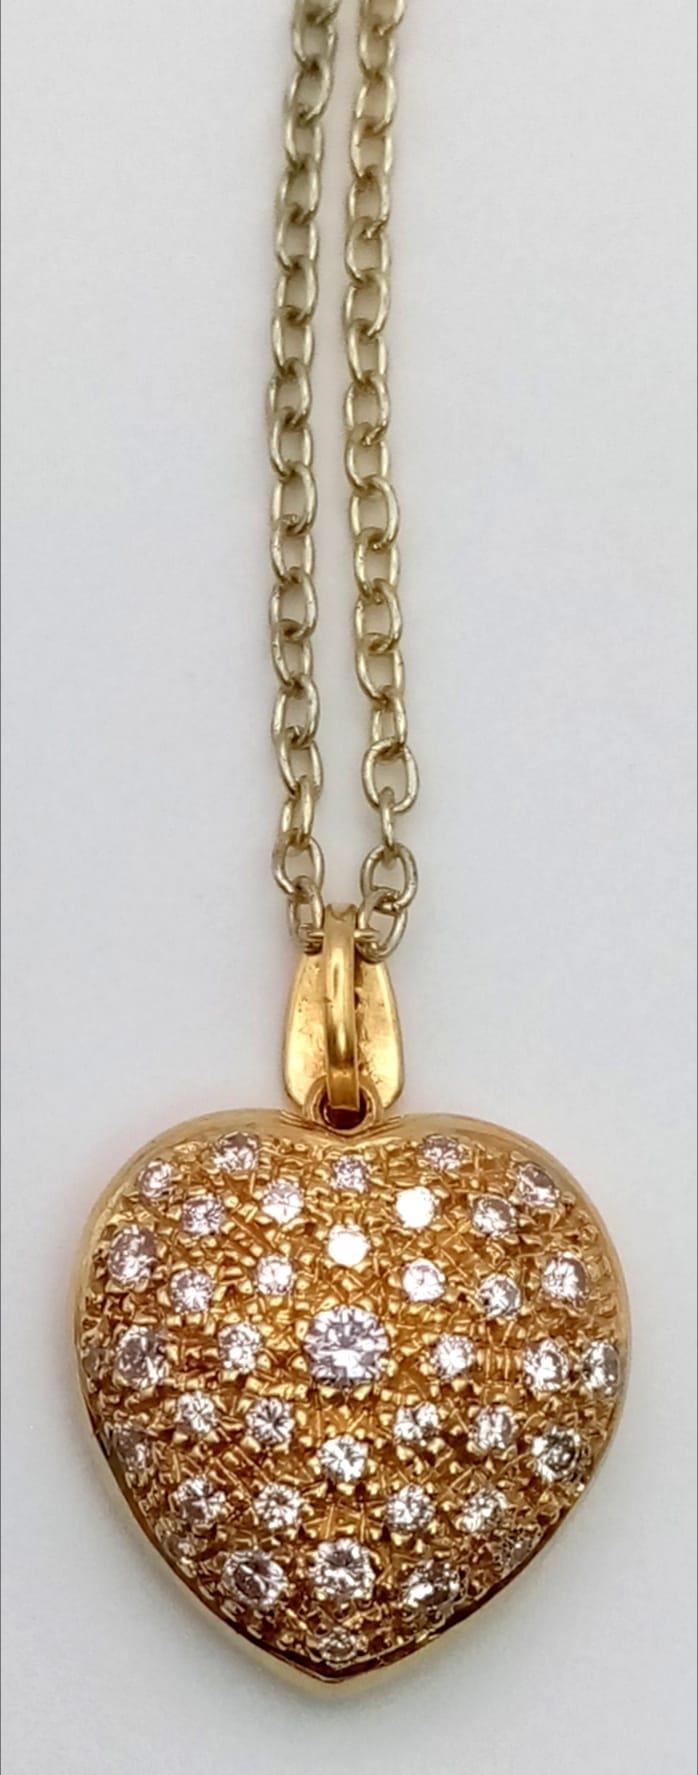 An 18K Yellow Gold Heart-Shaped Diamond Pendant. With over 1ct of bright white diamonds this - Image 2 of 4